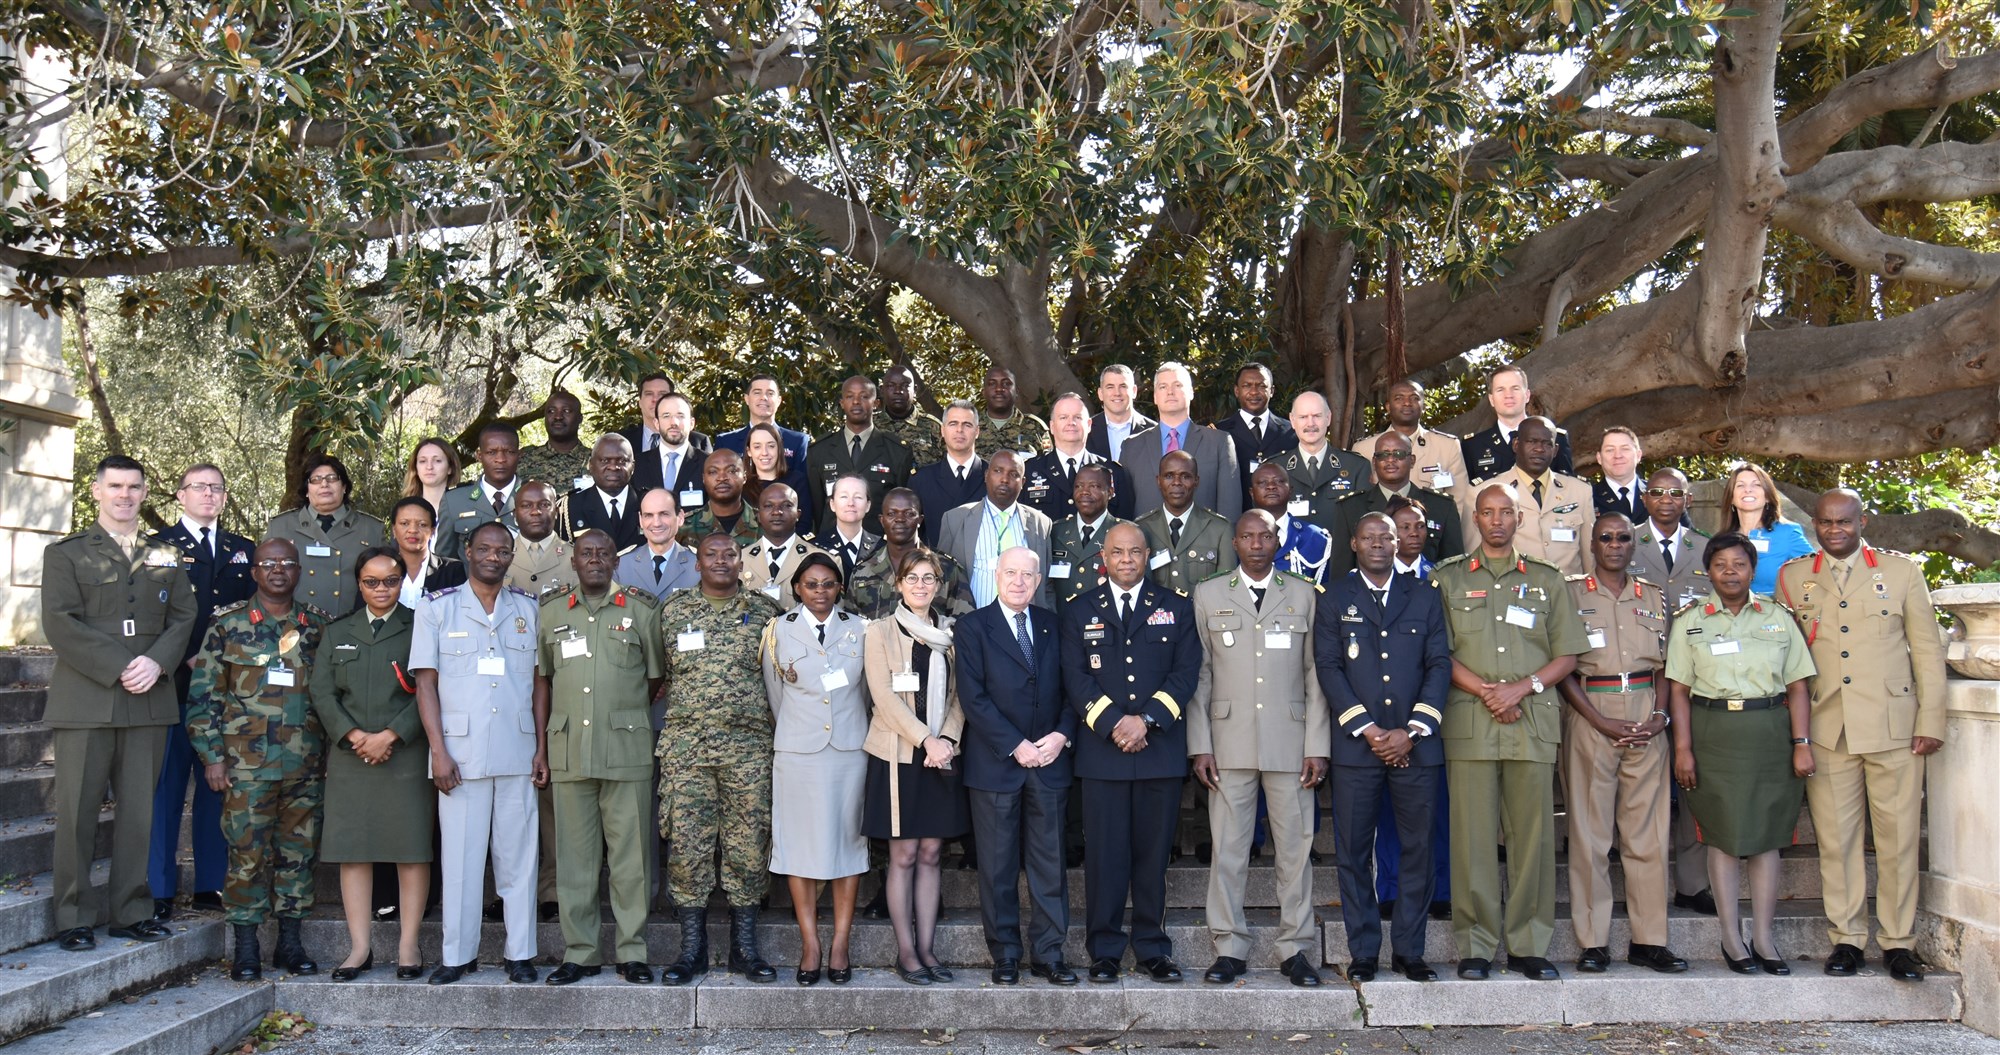 Group photo of participants of the U.S. AFRICOM’s Fourth Africa Accountability Colloquium (ACIV) on “Responding to Gender Based Violence During Peace Operations.”  Nearly 40 military legal professional and commanders from 20 African countries have come together in an effort to lay the foundation for responding to sexual violence allegations that occur during peacekeeping operations.  The annual event is once again being hosted by the International Institute of Humanitarian Law (IIHL) in Sanremo, Italy, Mar. 1-3, 2016.  (U.S. Africa Command photo by Brenda Law/RELEASED)